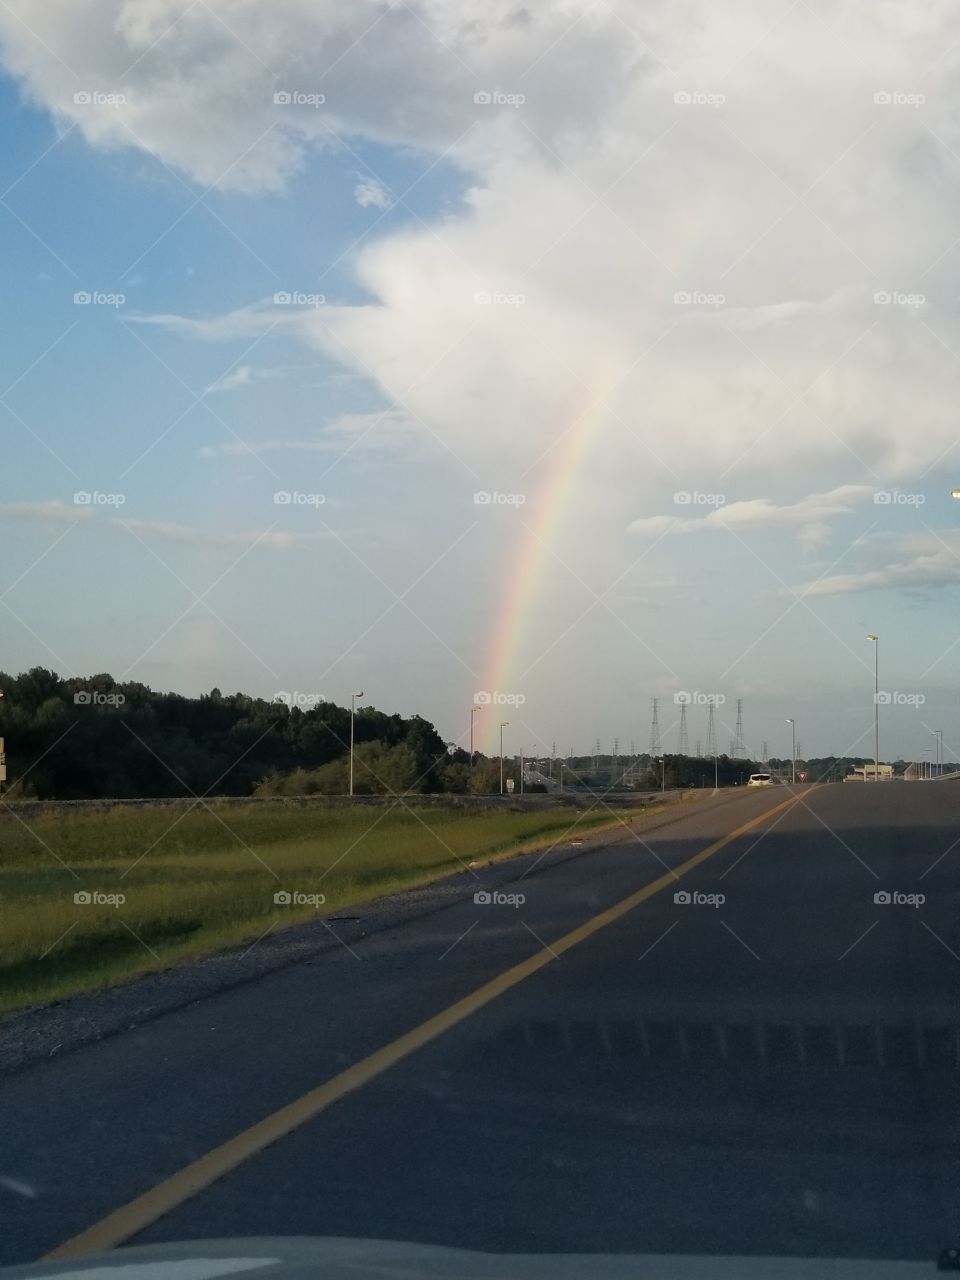 End of the Rainbow